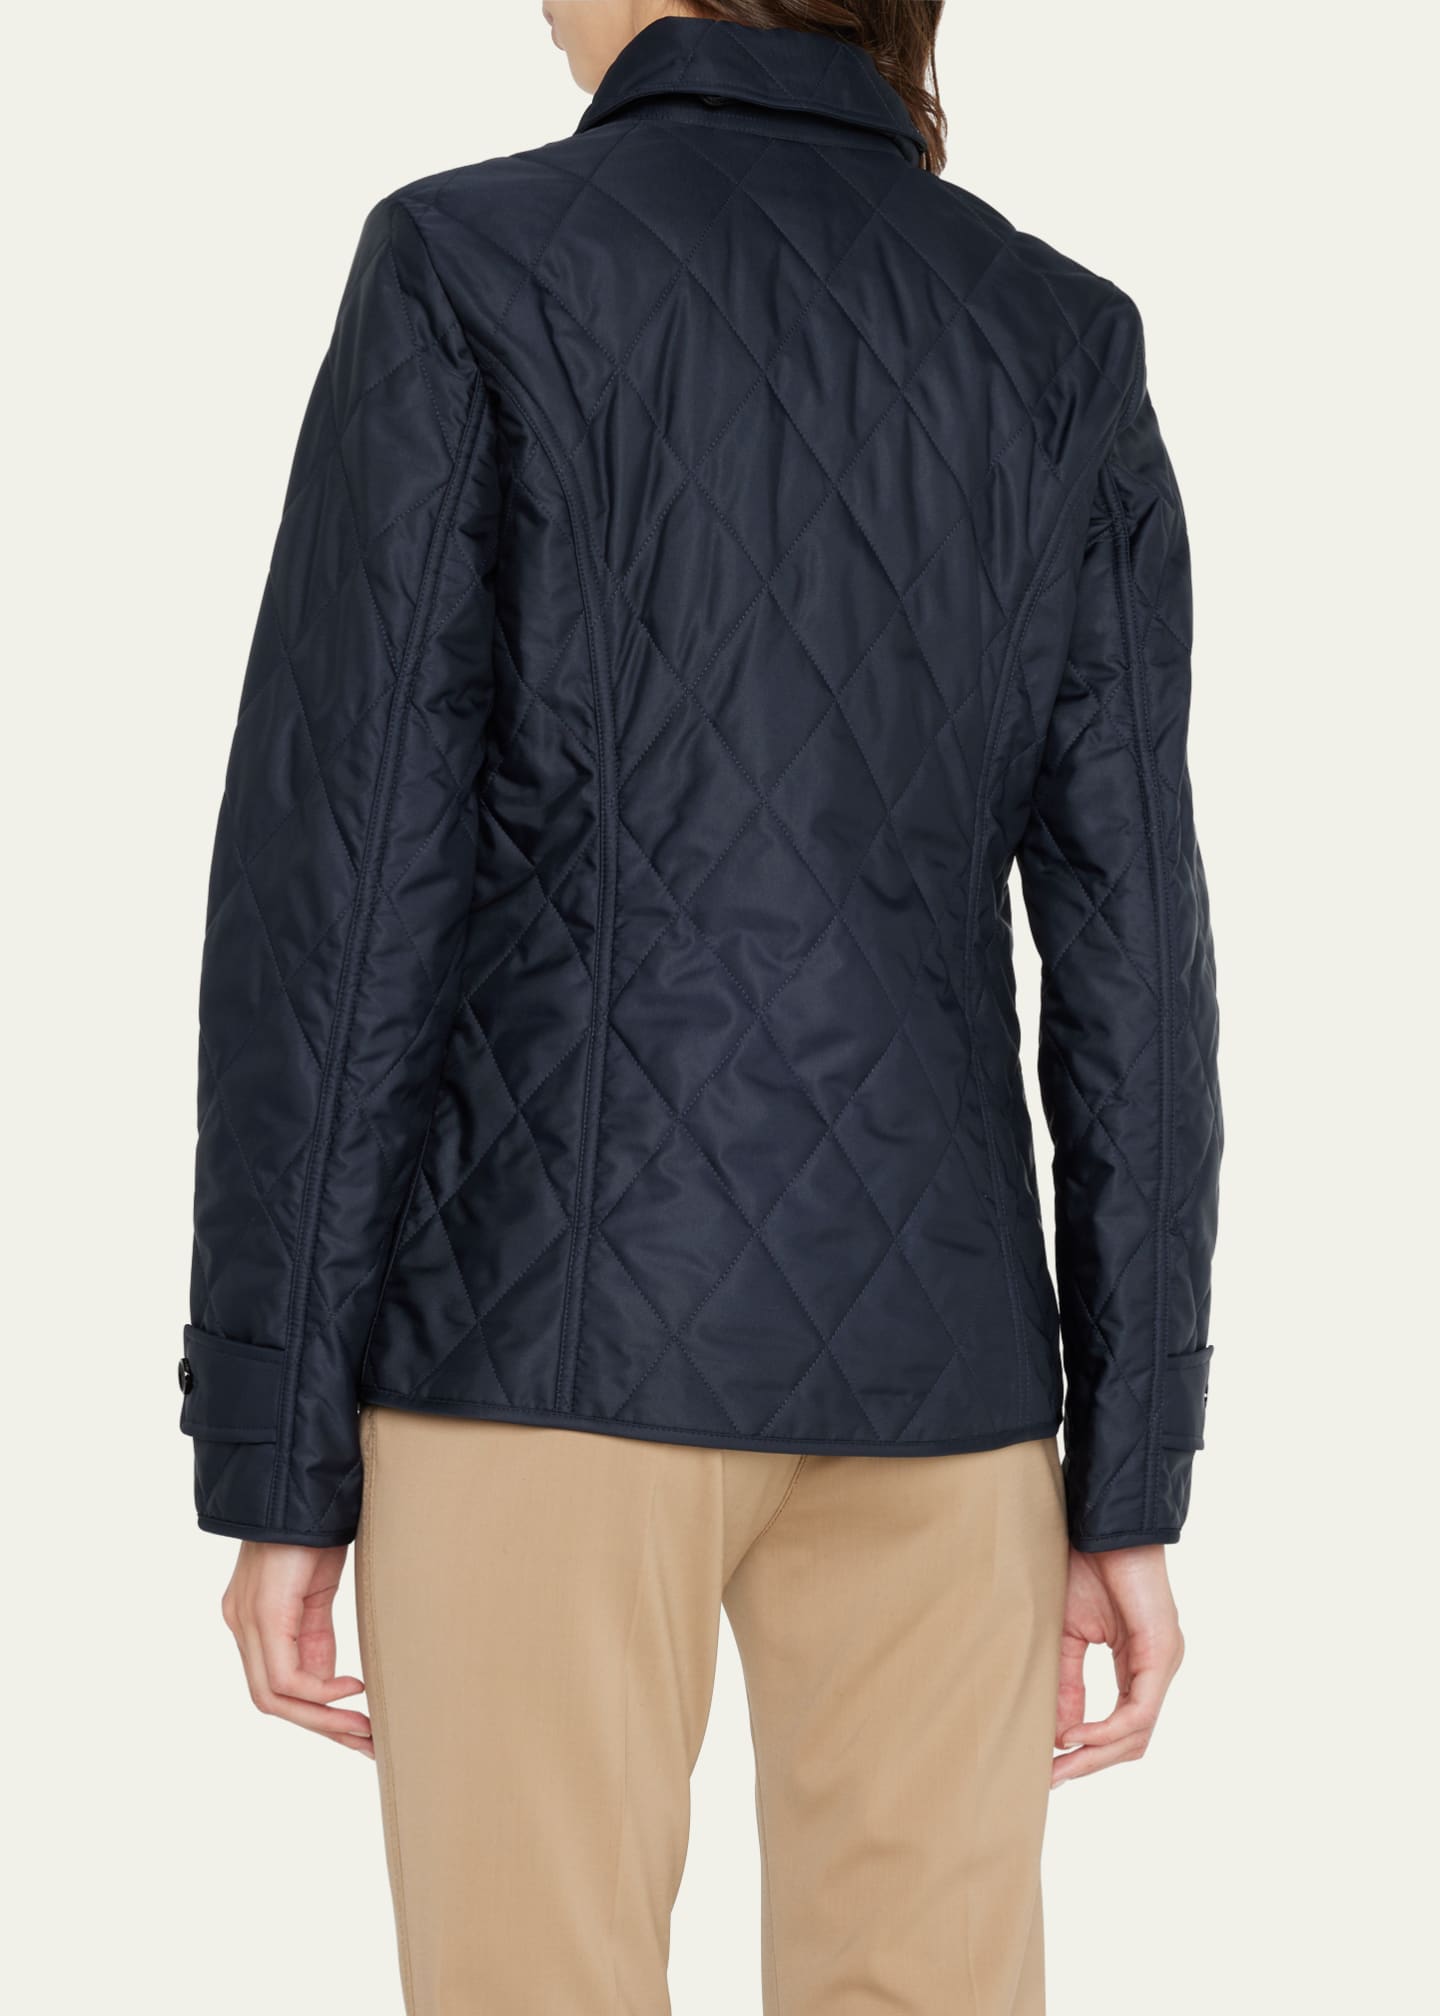 Burberry Collared Diamond Quilted Jacket - Bergdorf Goodman